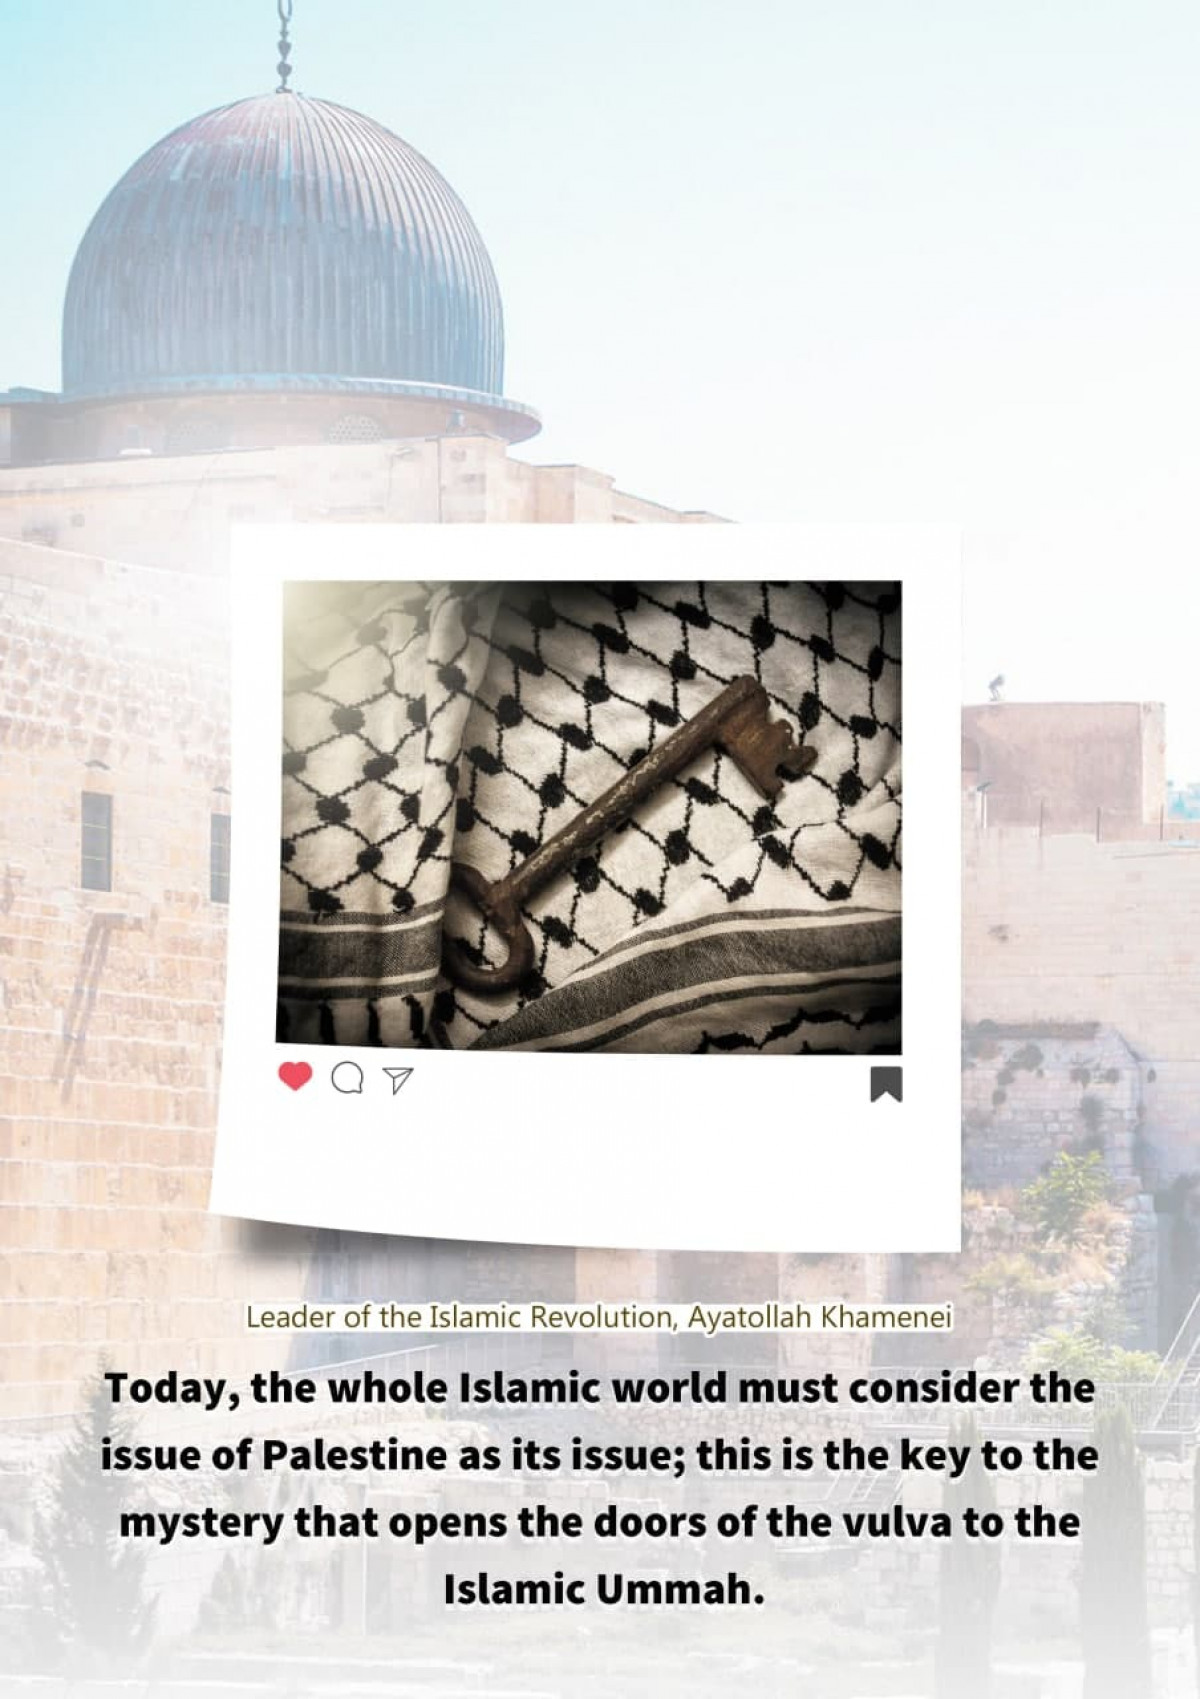 Today, the whole Islamic world must consider the issue of Palestine as its issue